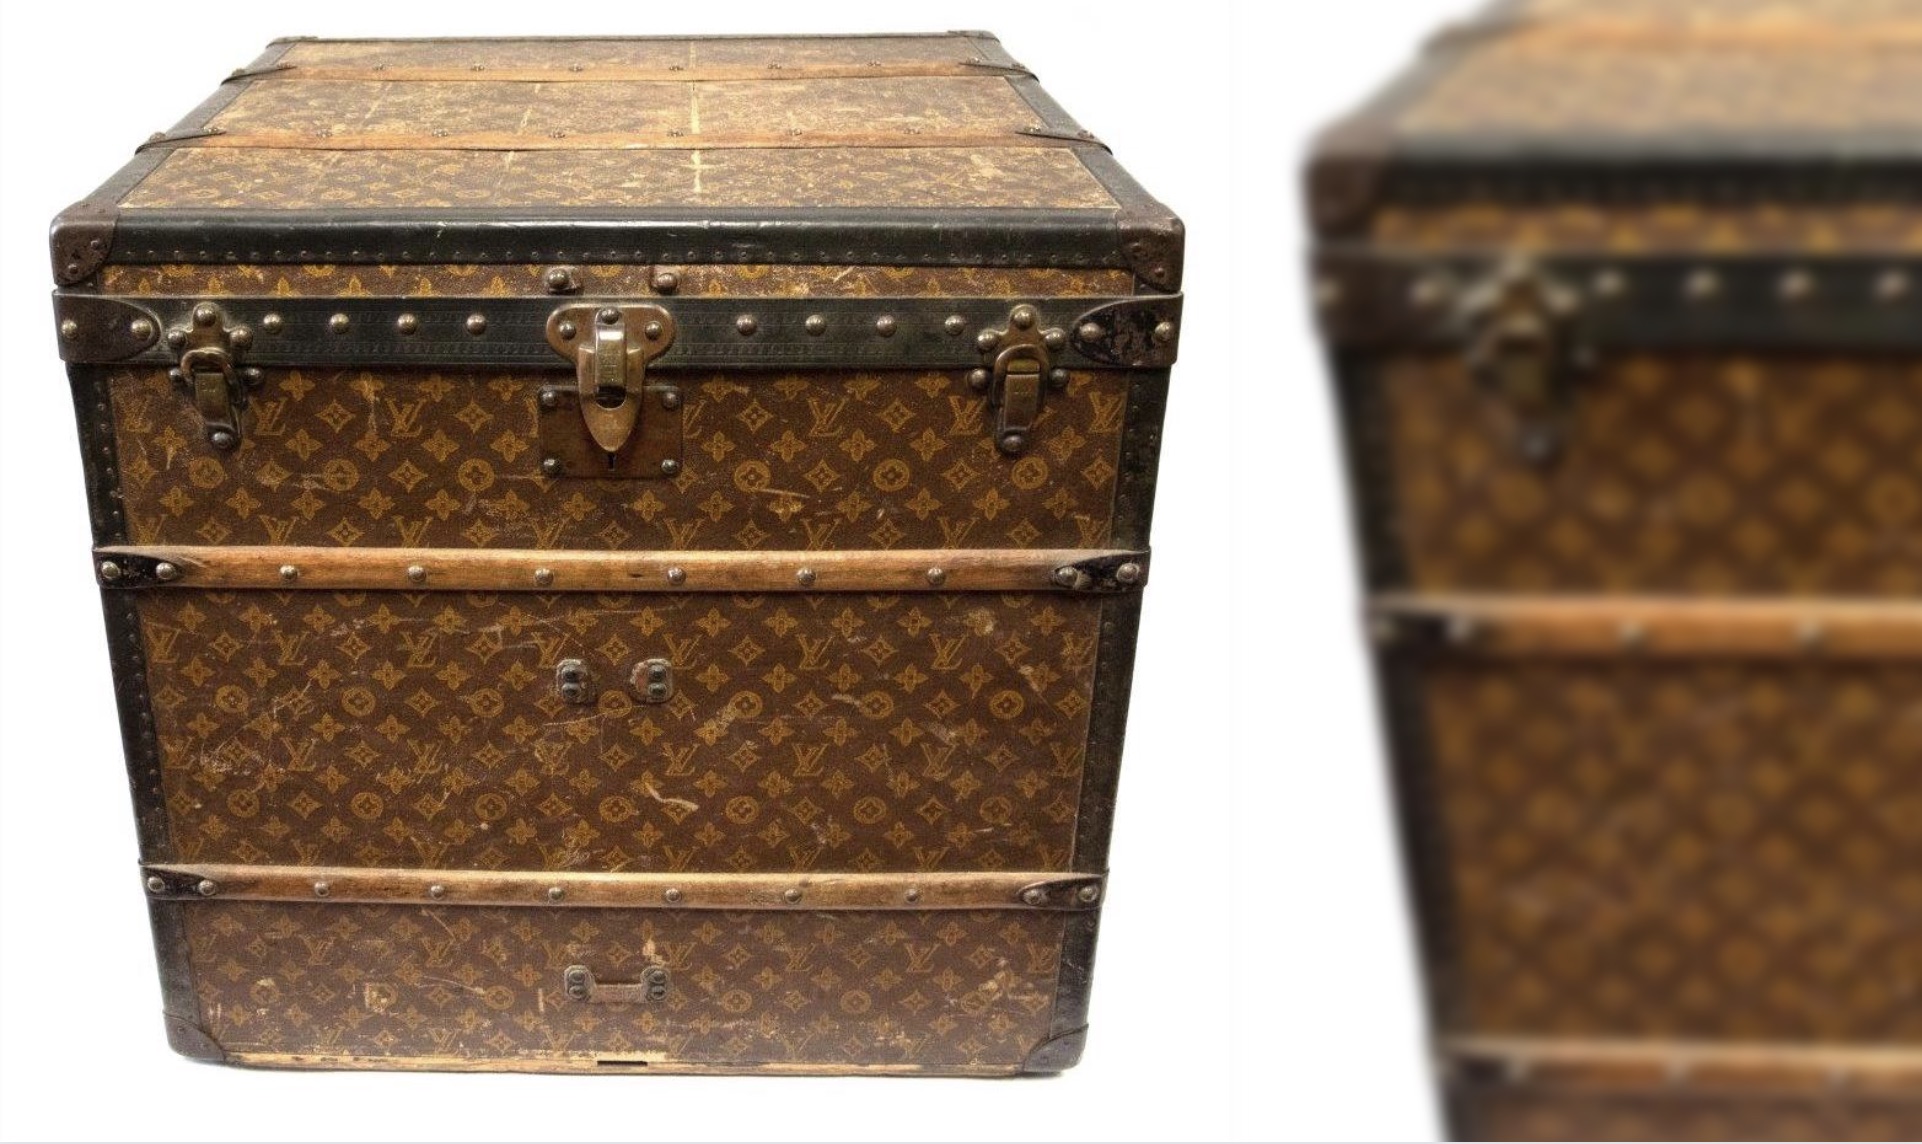 Louis Vuitton steamer trunk in London sale - Antique Collecting